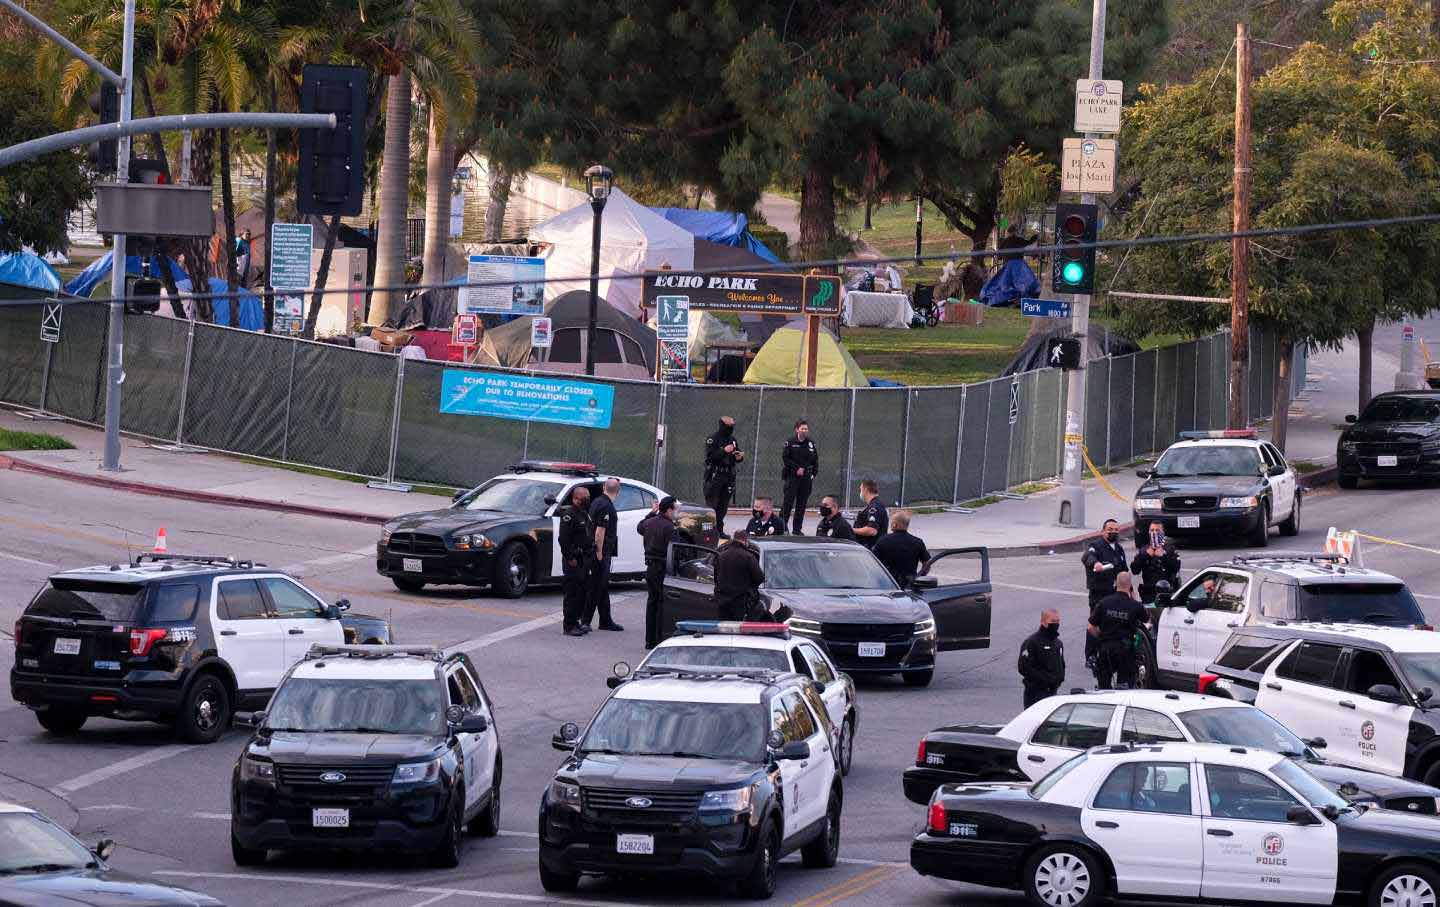 Police officers and their vehicles congregate in front of Echo Park in Los Angeles on March 25, 2021.